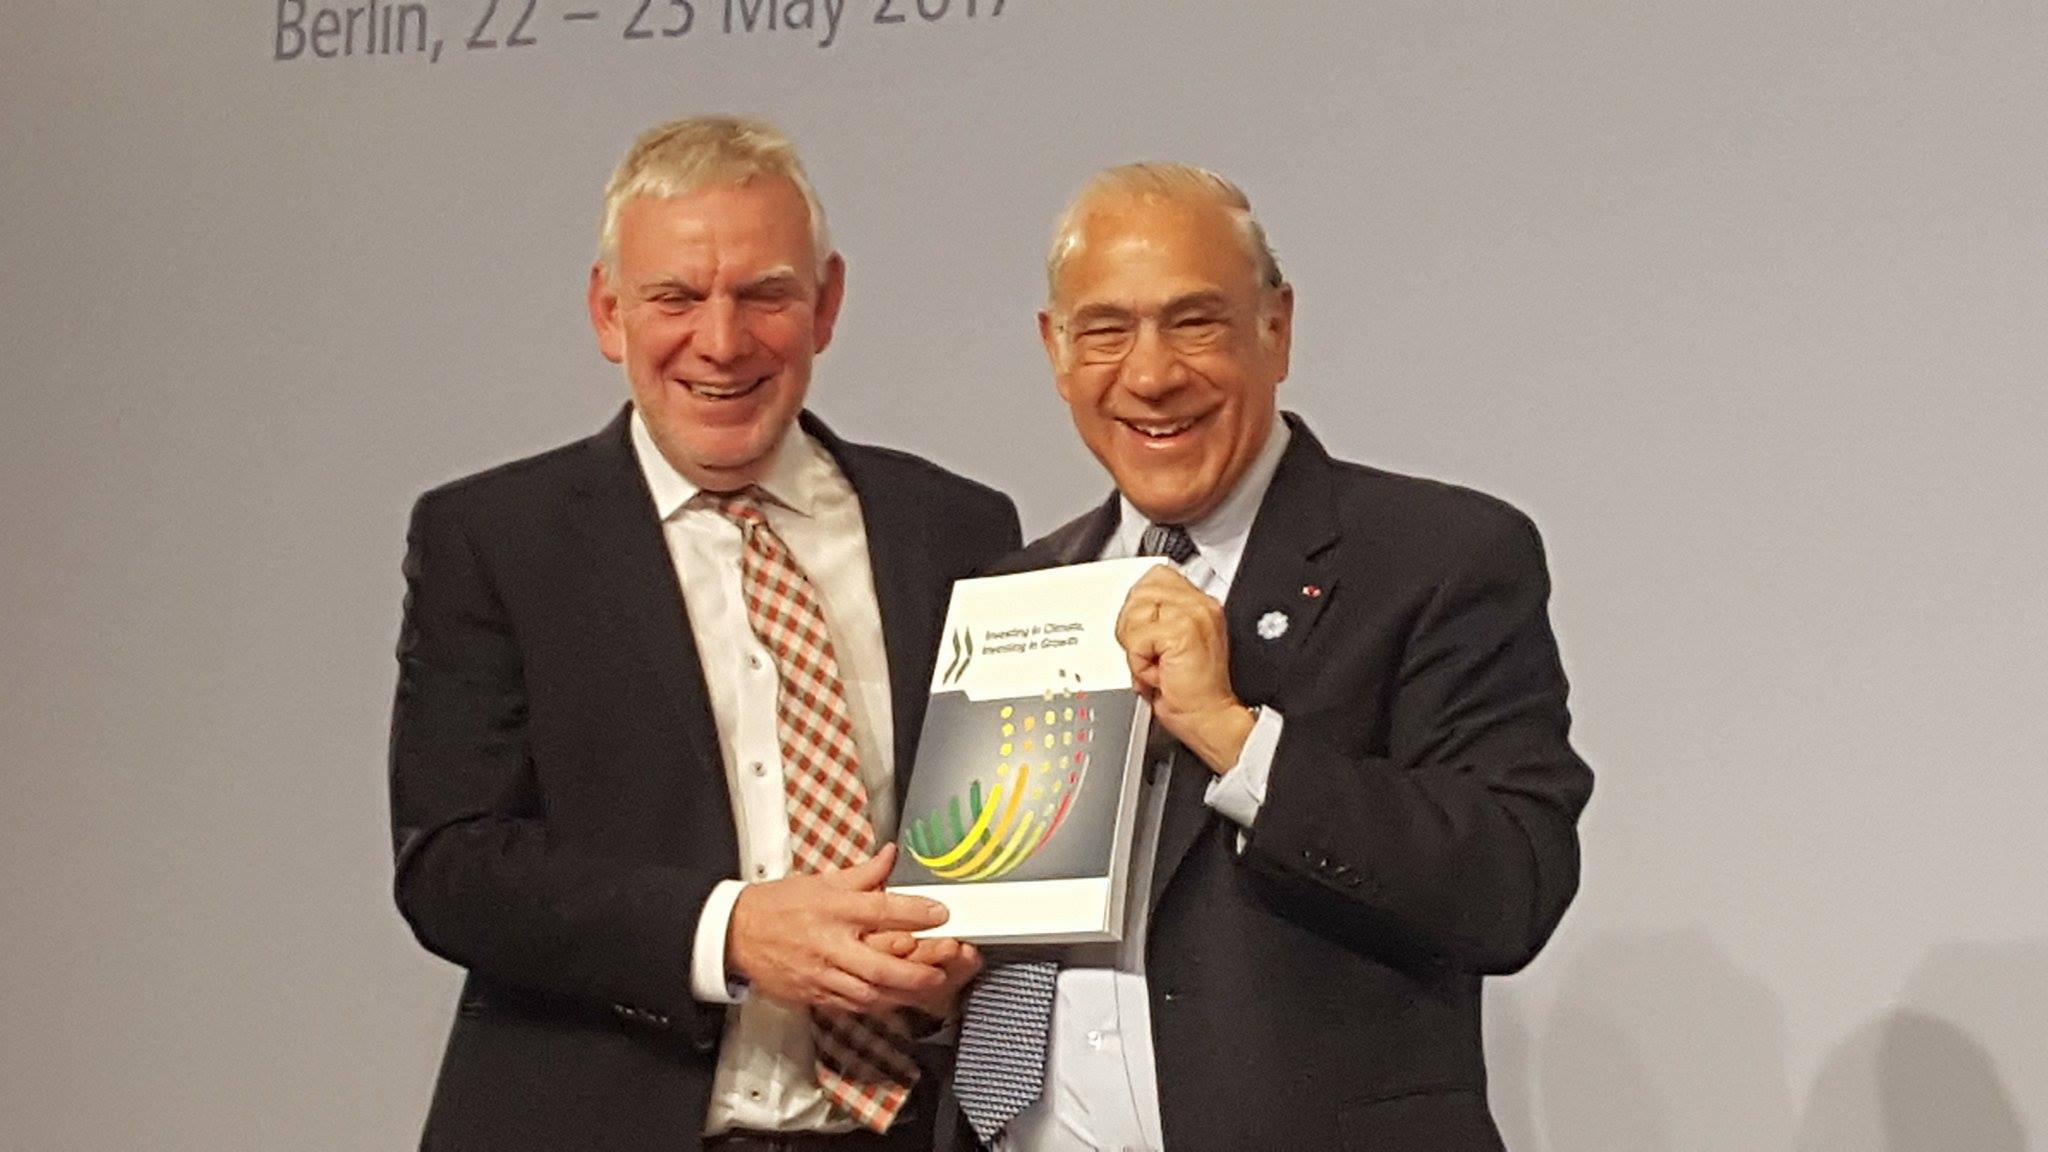 NEW REPORT. German State Secretary Jochen Flasbarth (L) and OECD Secretary General Jose Angel Gurria (R) hold up a copy of the 'Investing in Climate, Investing in Growth' report in a press conference in Berlin, Germany, May 23, 2017. Photo by KD Suarez/Rappler  